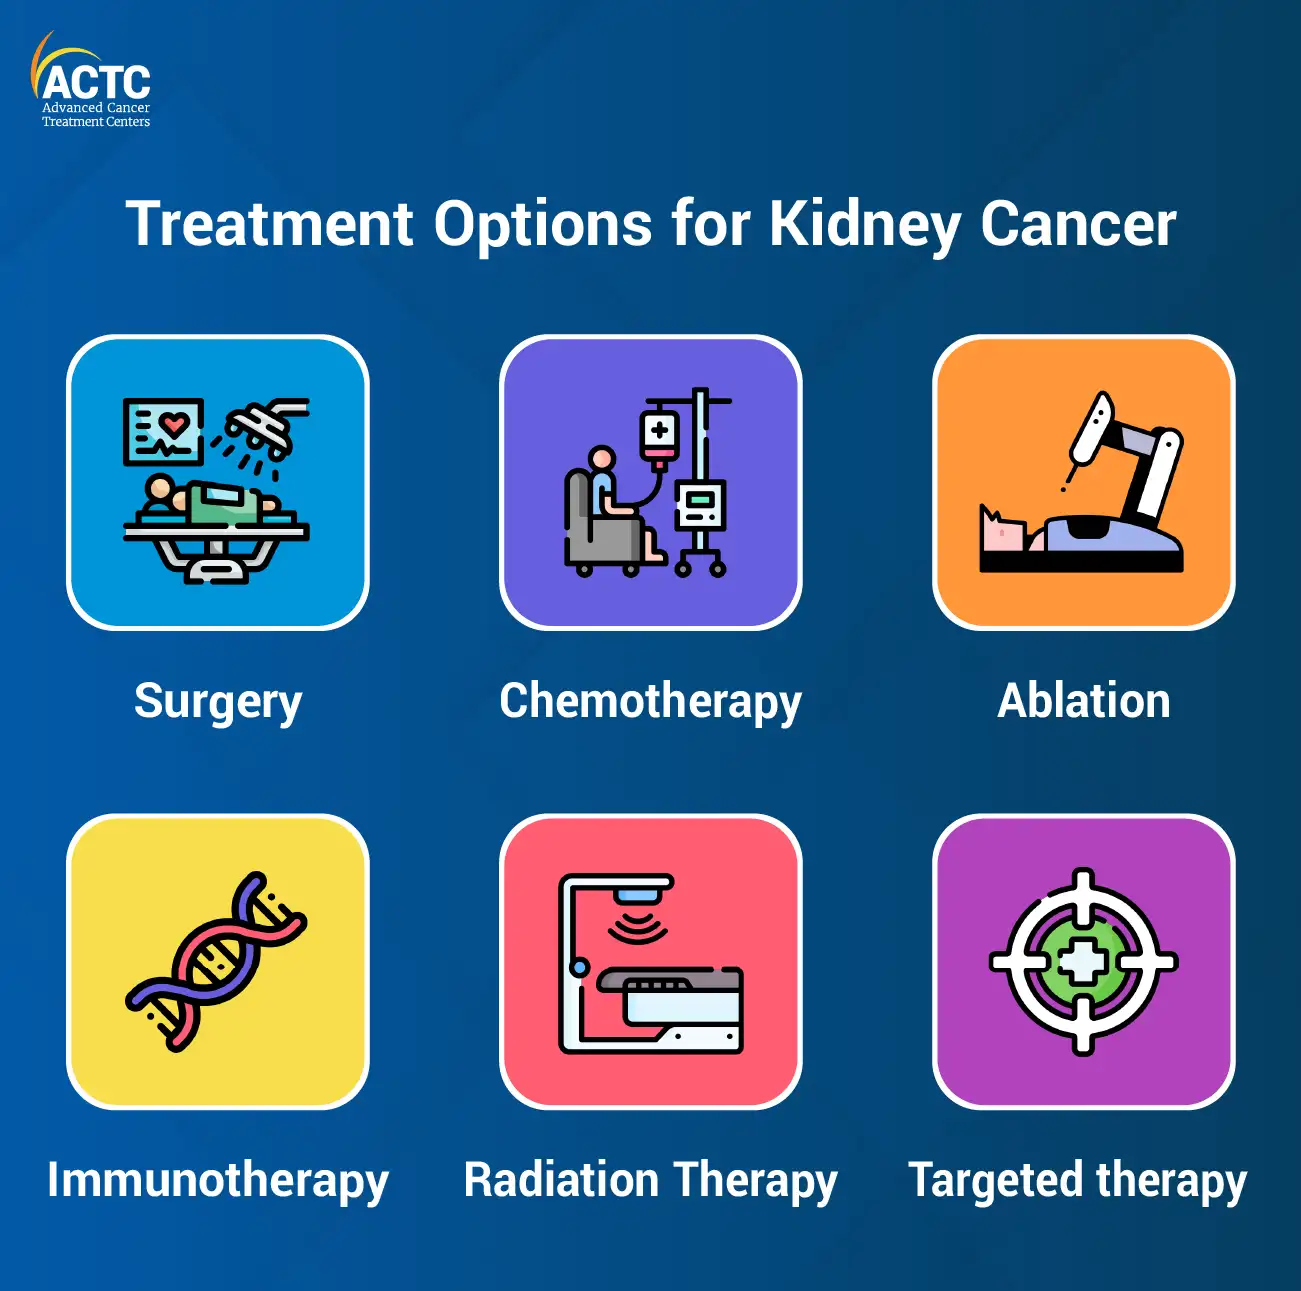 Treatment Options for Kidney Cancer